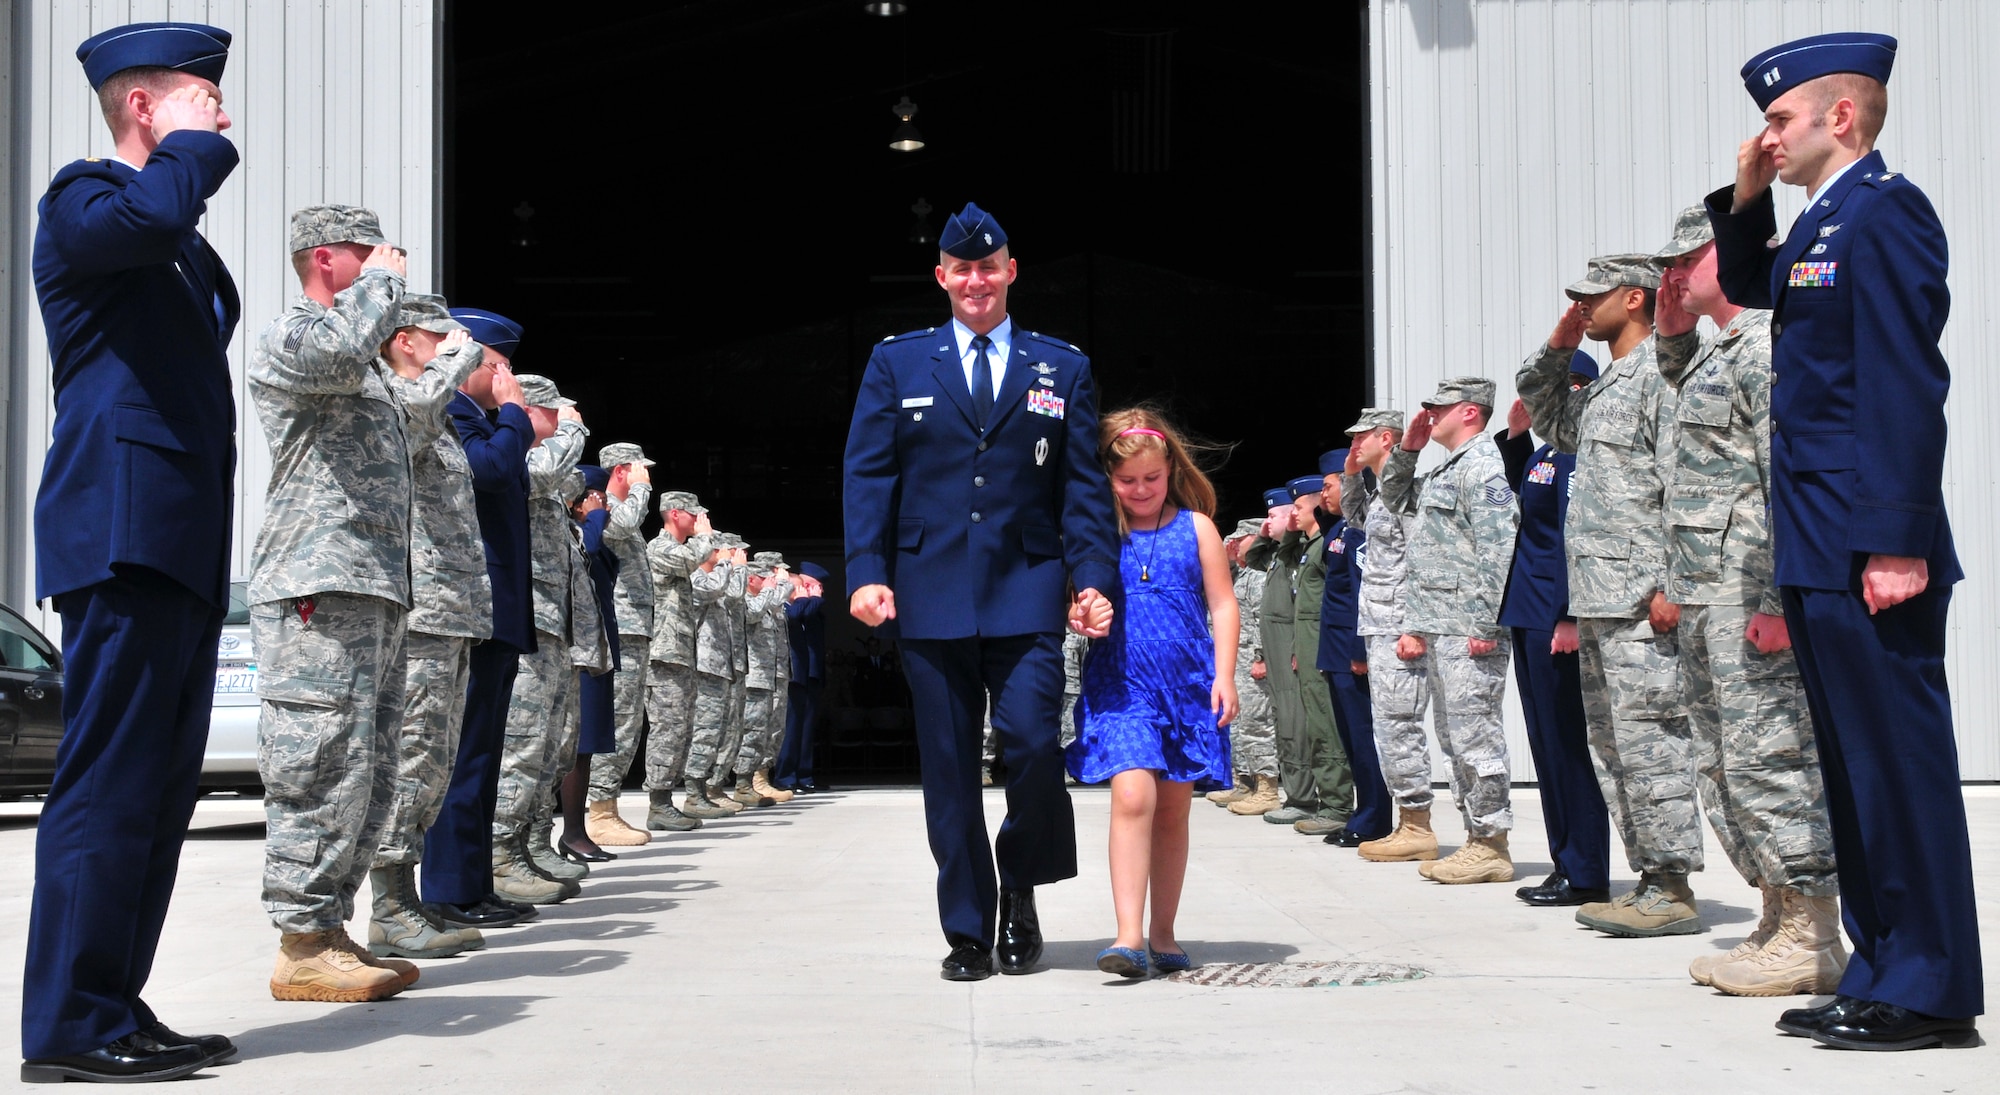 Lt. Col. Mike Assid and his daughter leaving the change of command of the 380th Space Control Squadron at the West Pac Restorations Hangar One in Colorado Springs, Colo., July 10. (U.S. Air Force photo by Tech. Sgt. Nick Ontiveros)